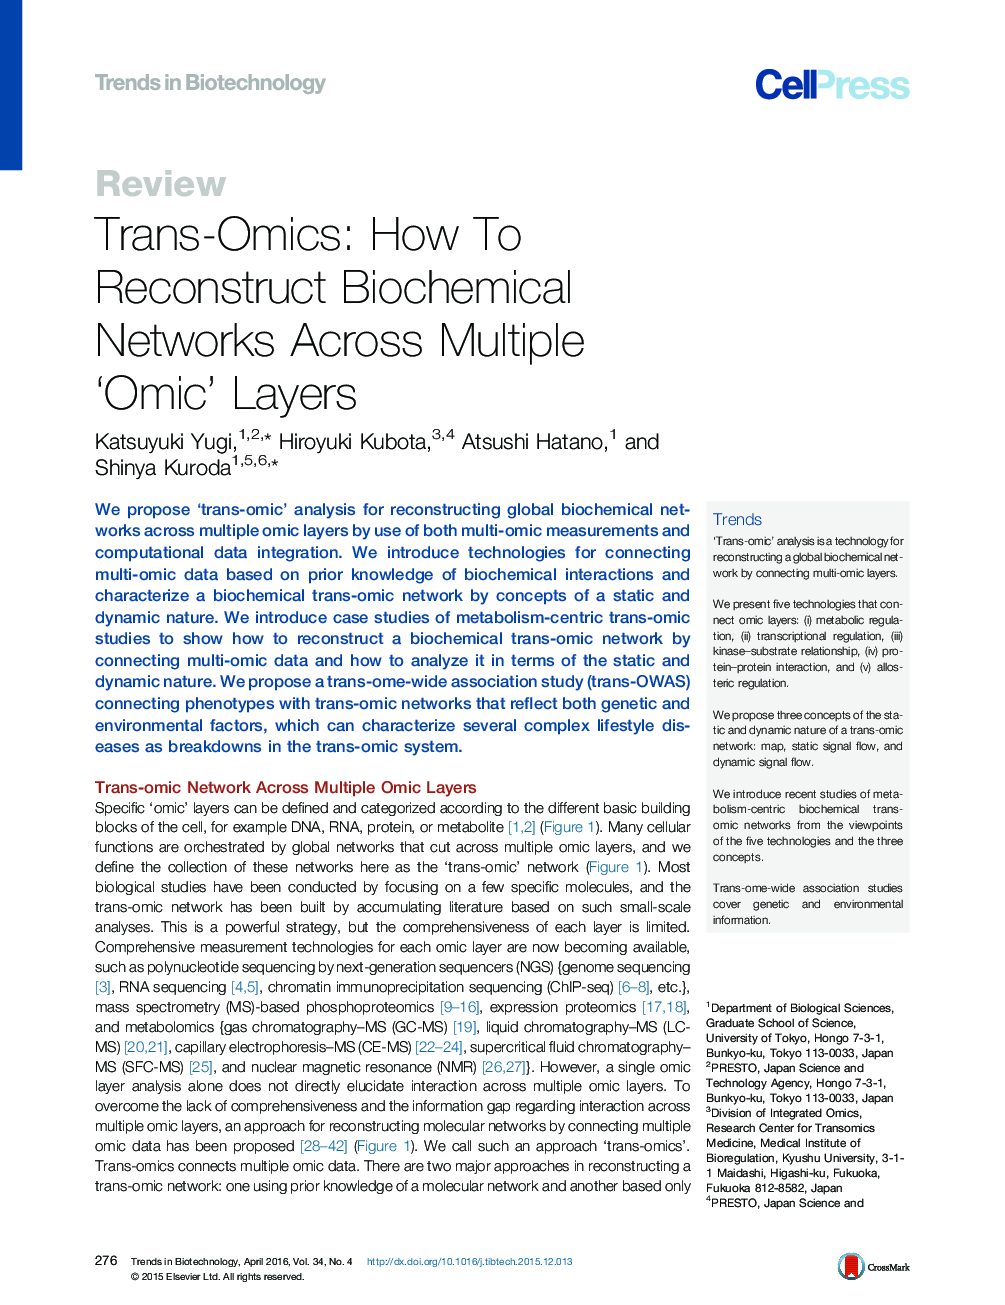 Trans-Omics: How To Reconstruct Biochemical Networks Across Multiple ‘Omic’ Layers